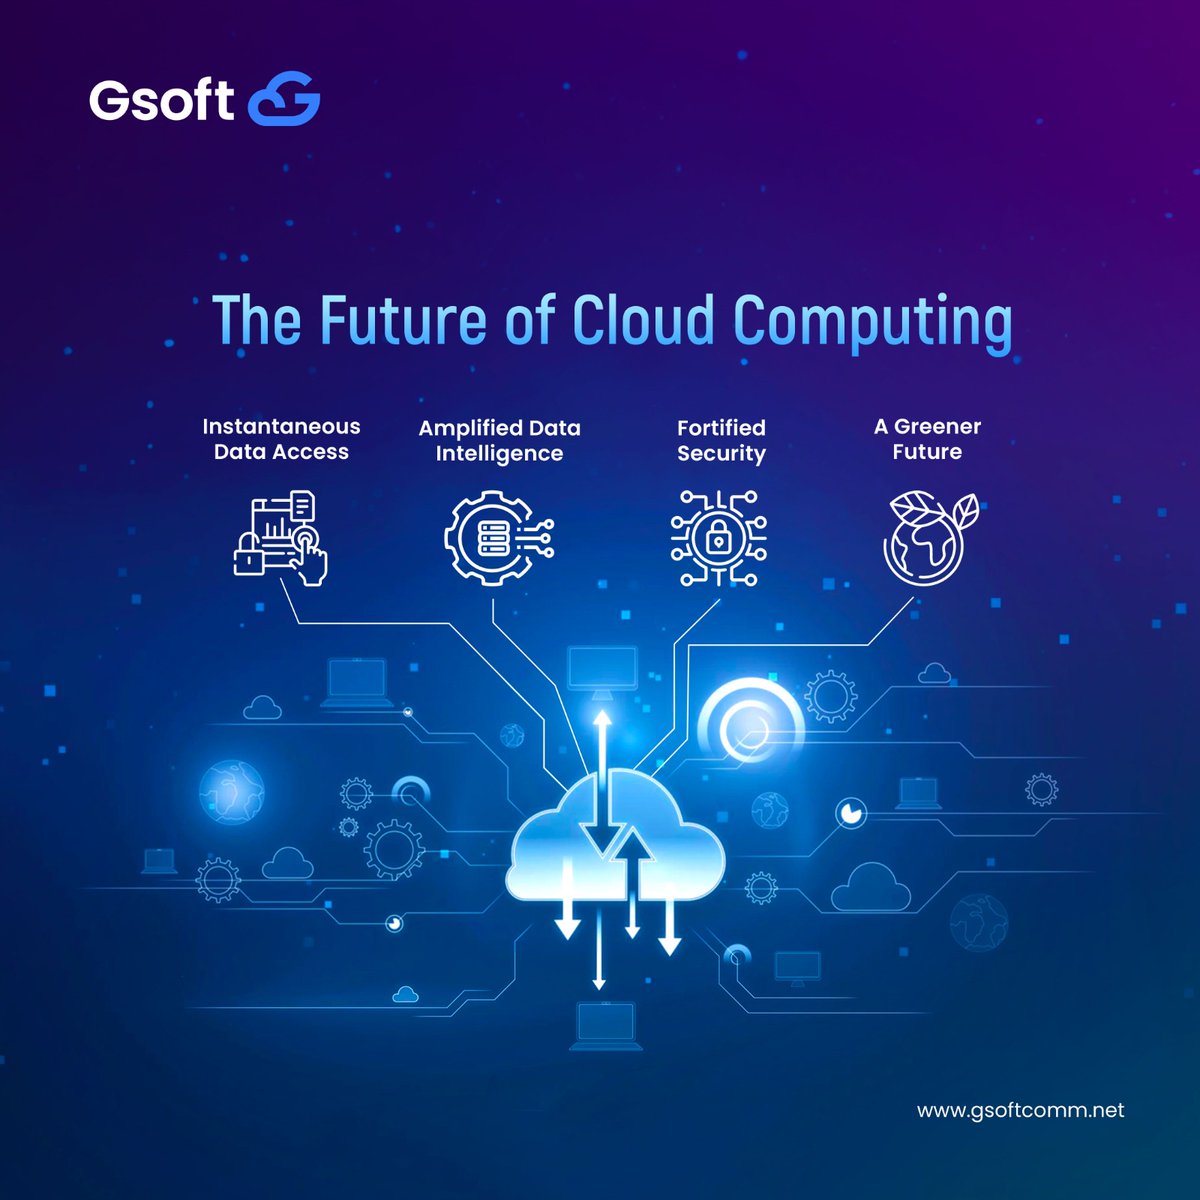 Cloud computing has already entered the mainstream, opening up numerous exciting possibilities for the future. gsoftcomm.net
Be future-ready with us.
#CloudComputing #cloudsecurity #cloudmigration #cloudtech #cloudtechnologies